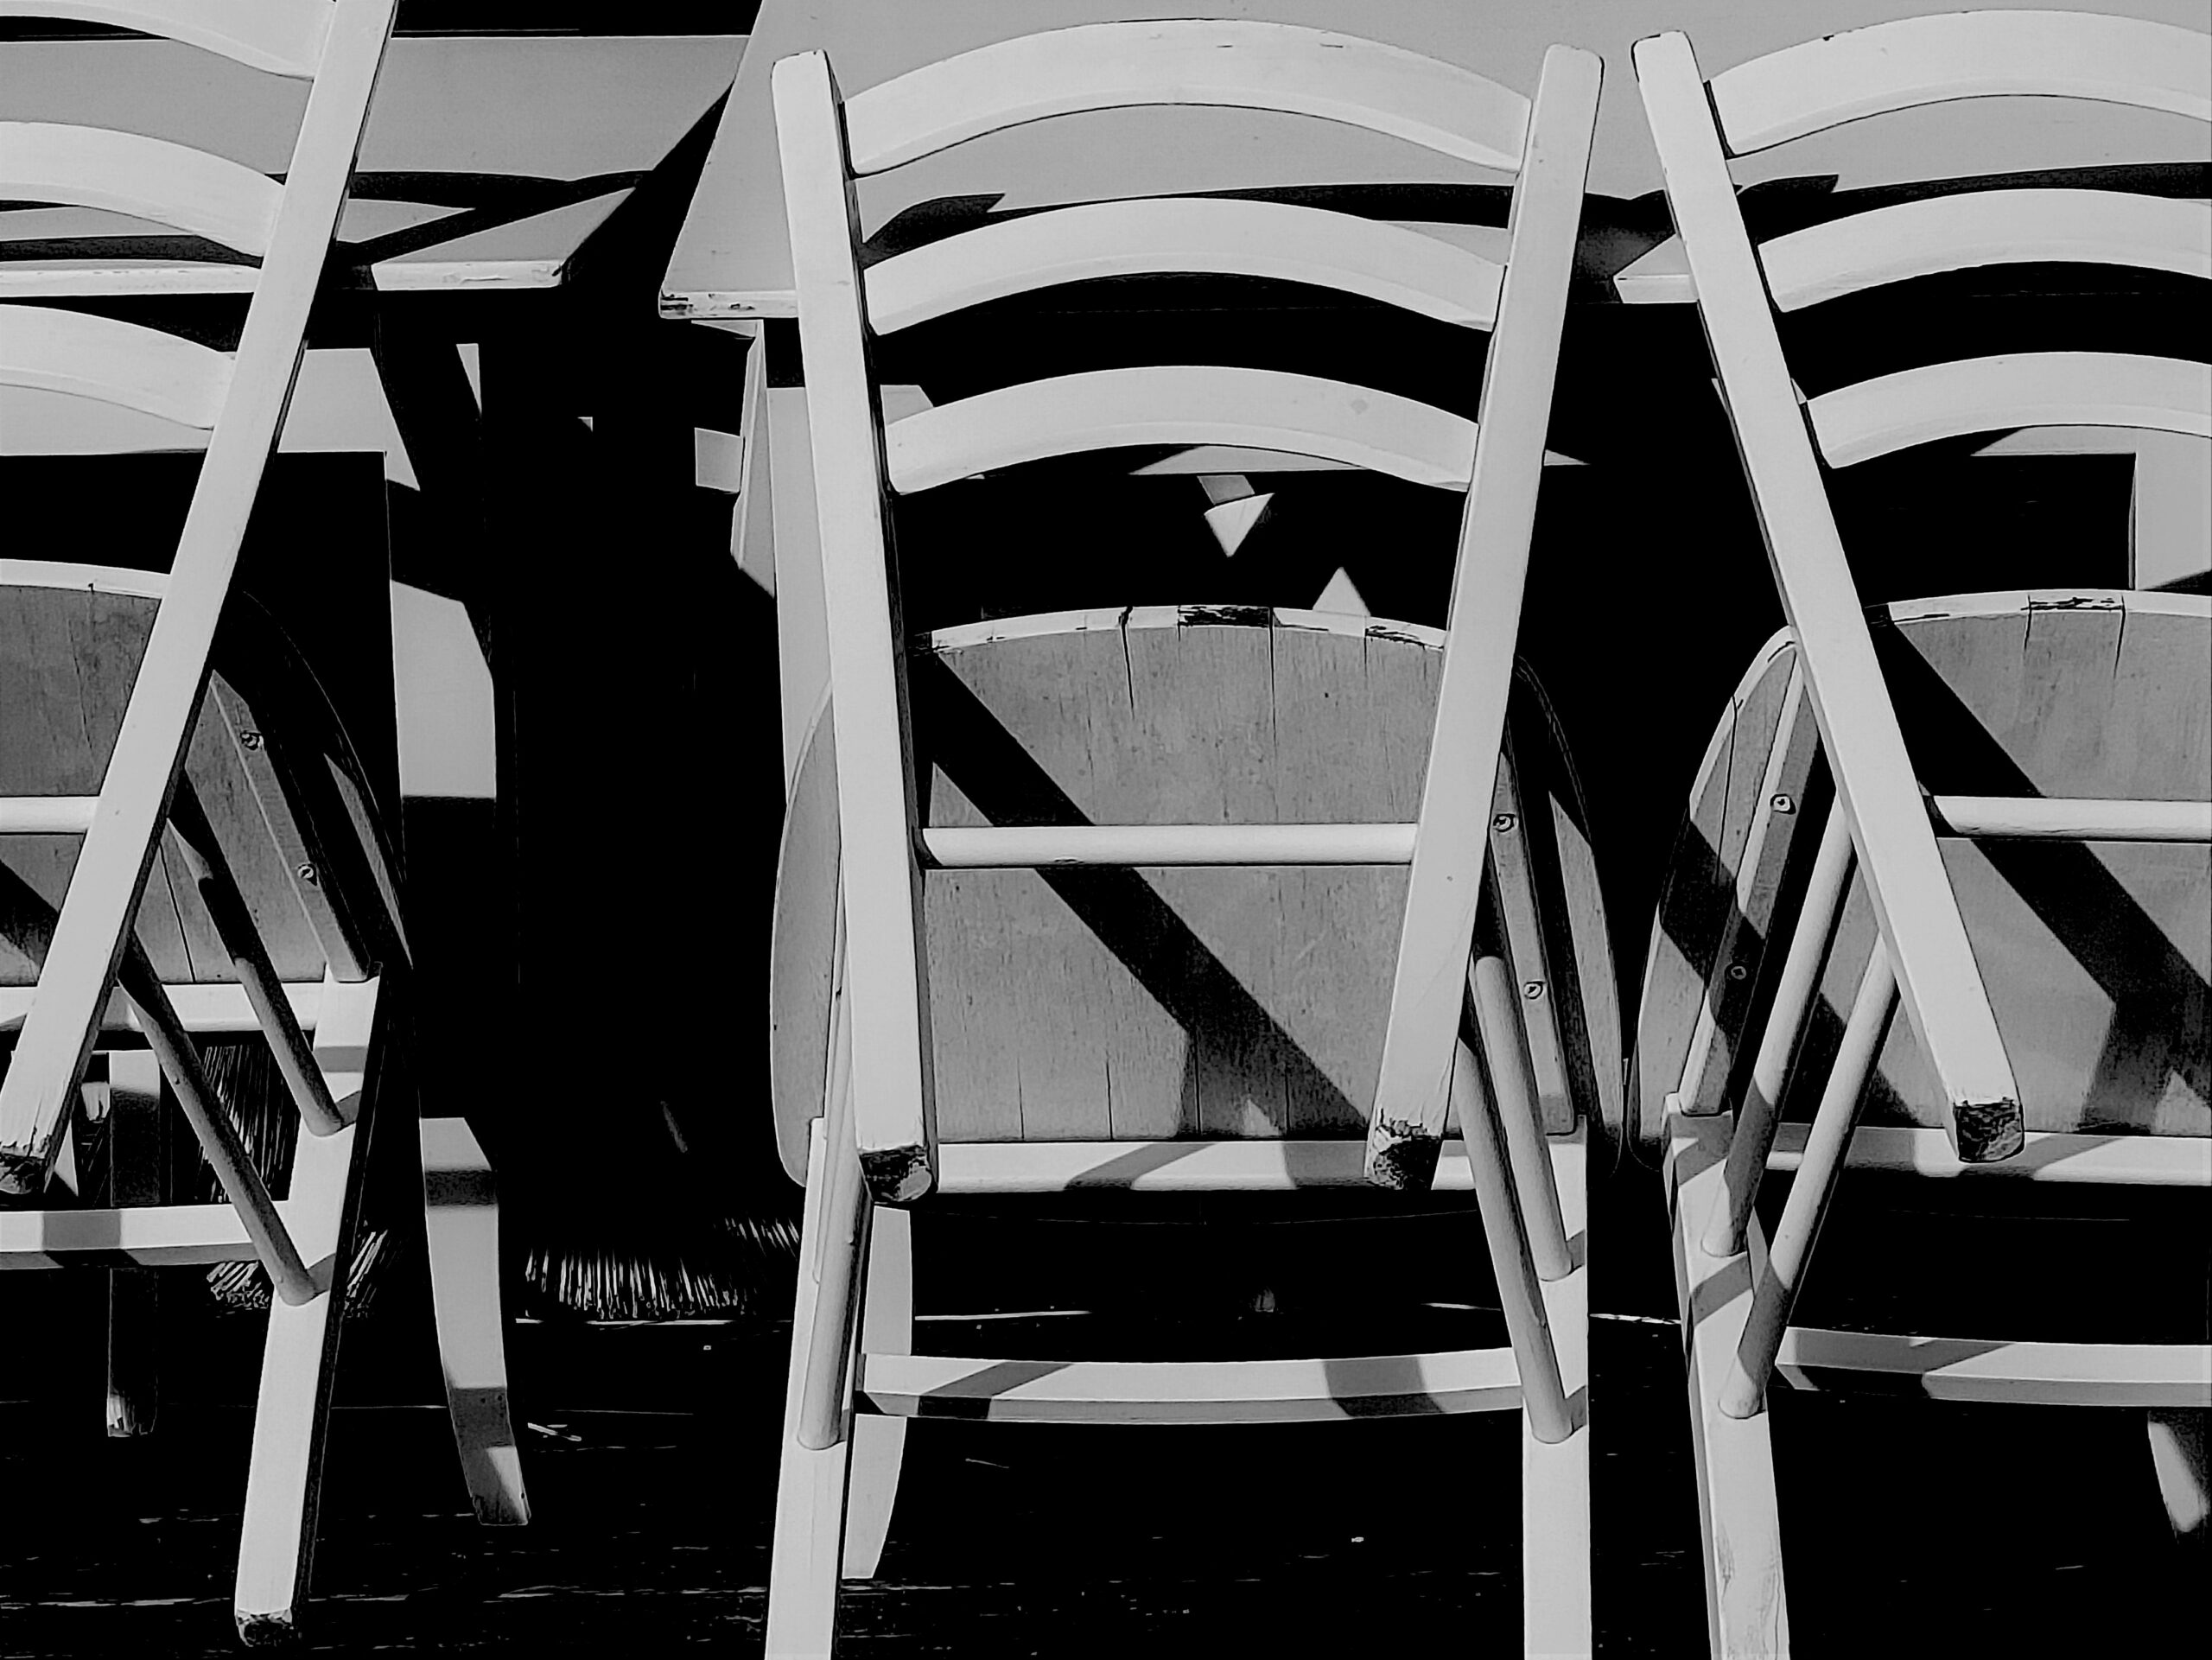 Sedie accatastate sulla spiaggia - Piled chairs on the beach - Gestapelte Stuehle am Strand